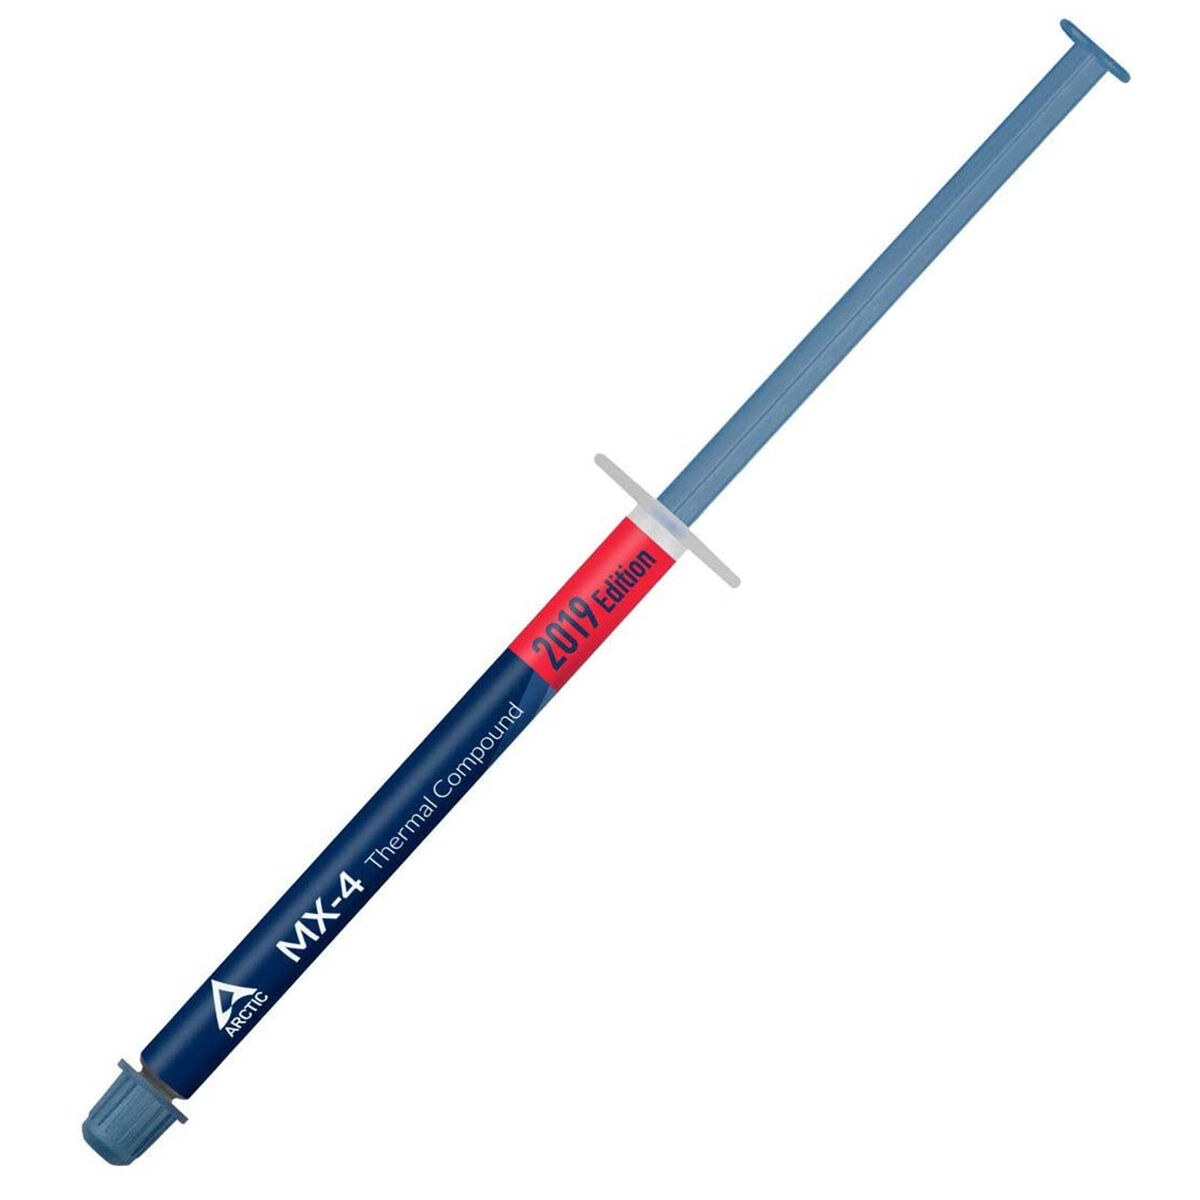 ARCTIC MX-4 (4 Grams) - Thermal Compound Paste, Carbon Based High